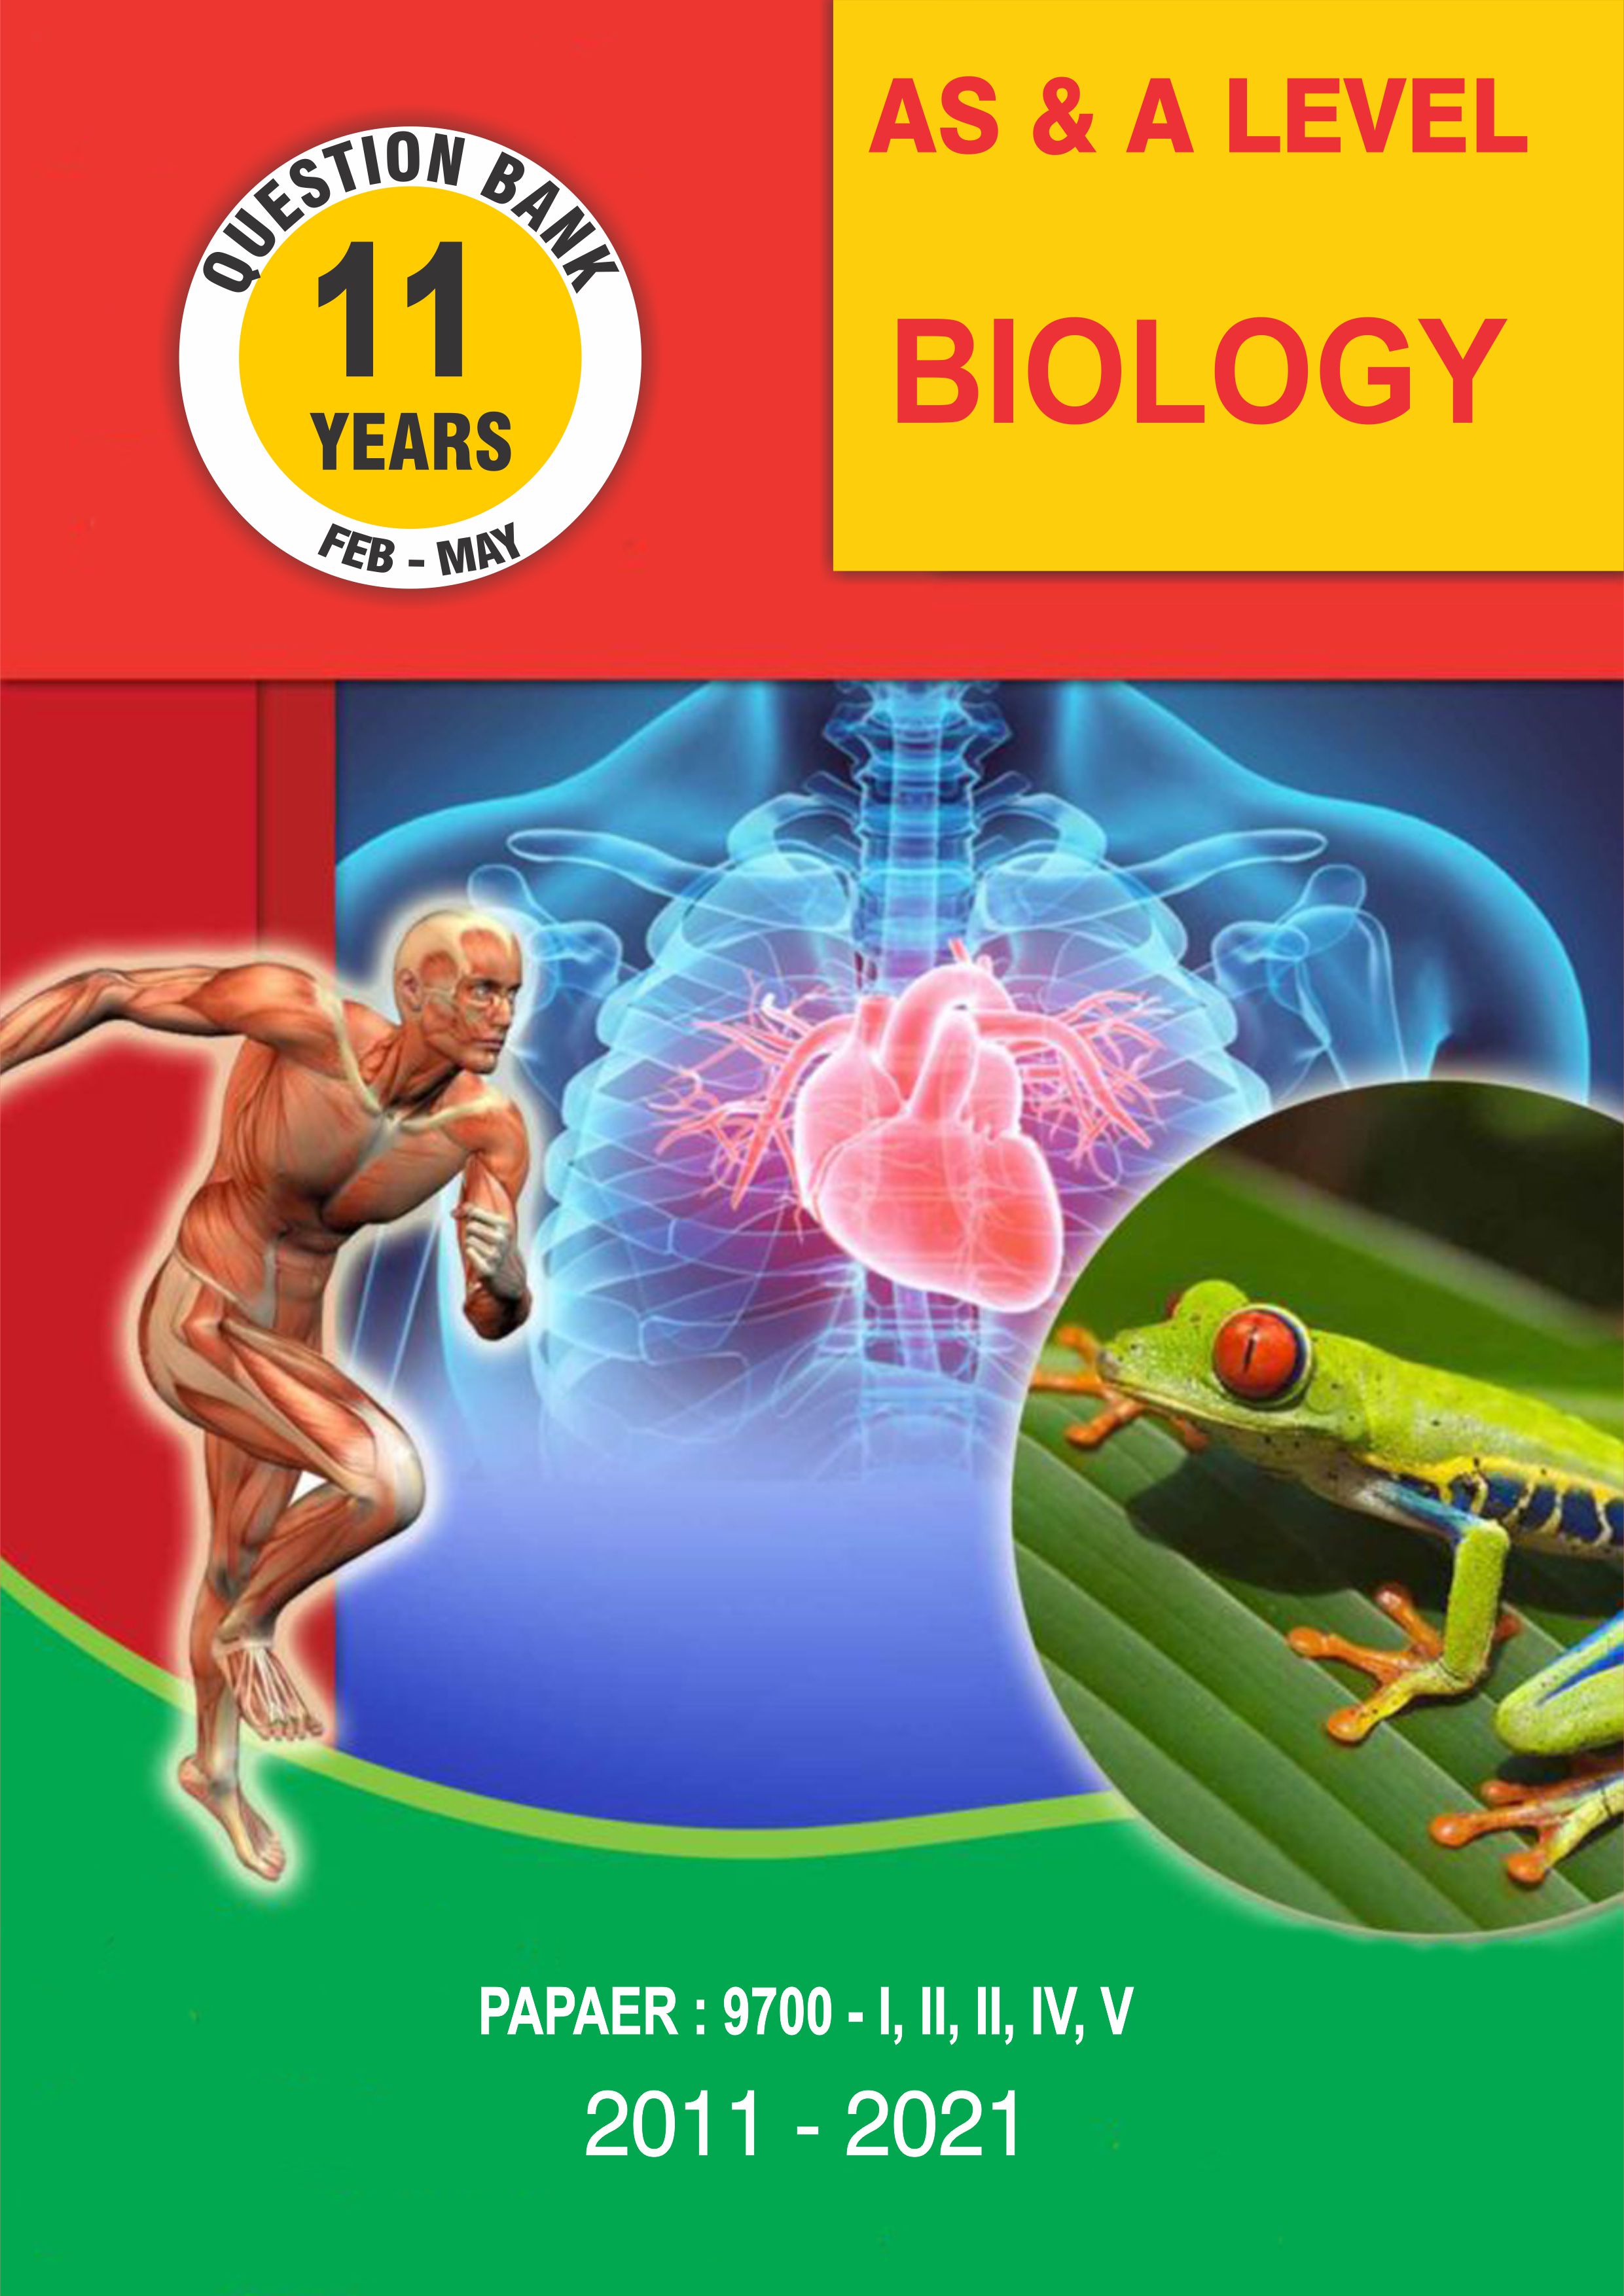 As & A Level Question Bank With Marking Schemes- Biology Paper Code 9700 Past 11 Years